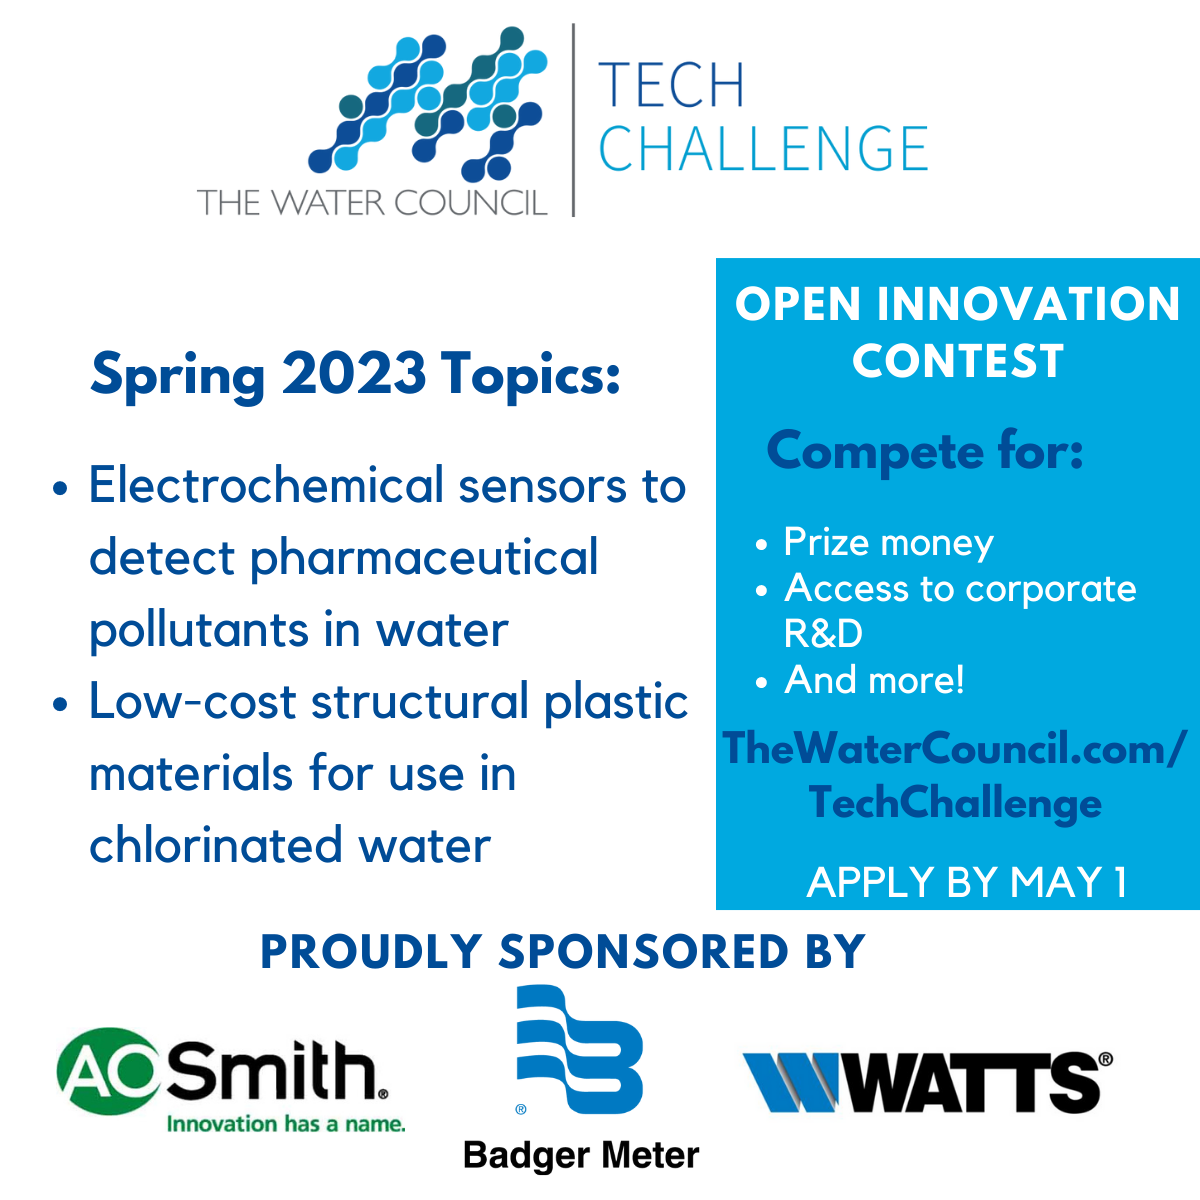 Do you know any solvers/solutions for the spring challenge topics? If so, please share or consider applying. Applications accepted through May 1...